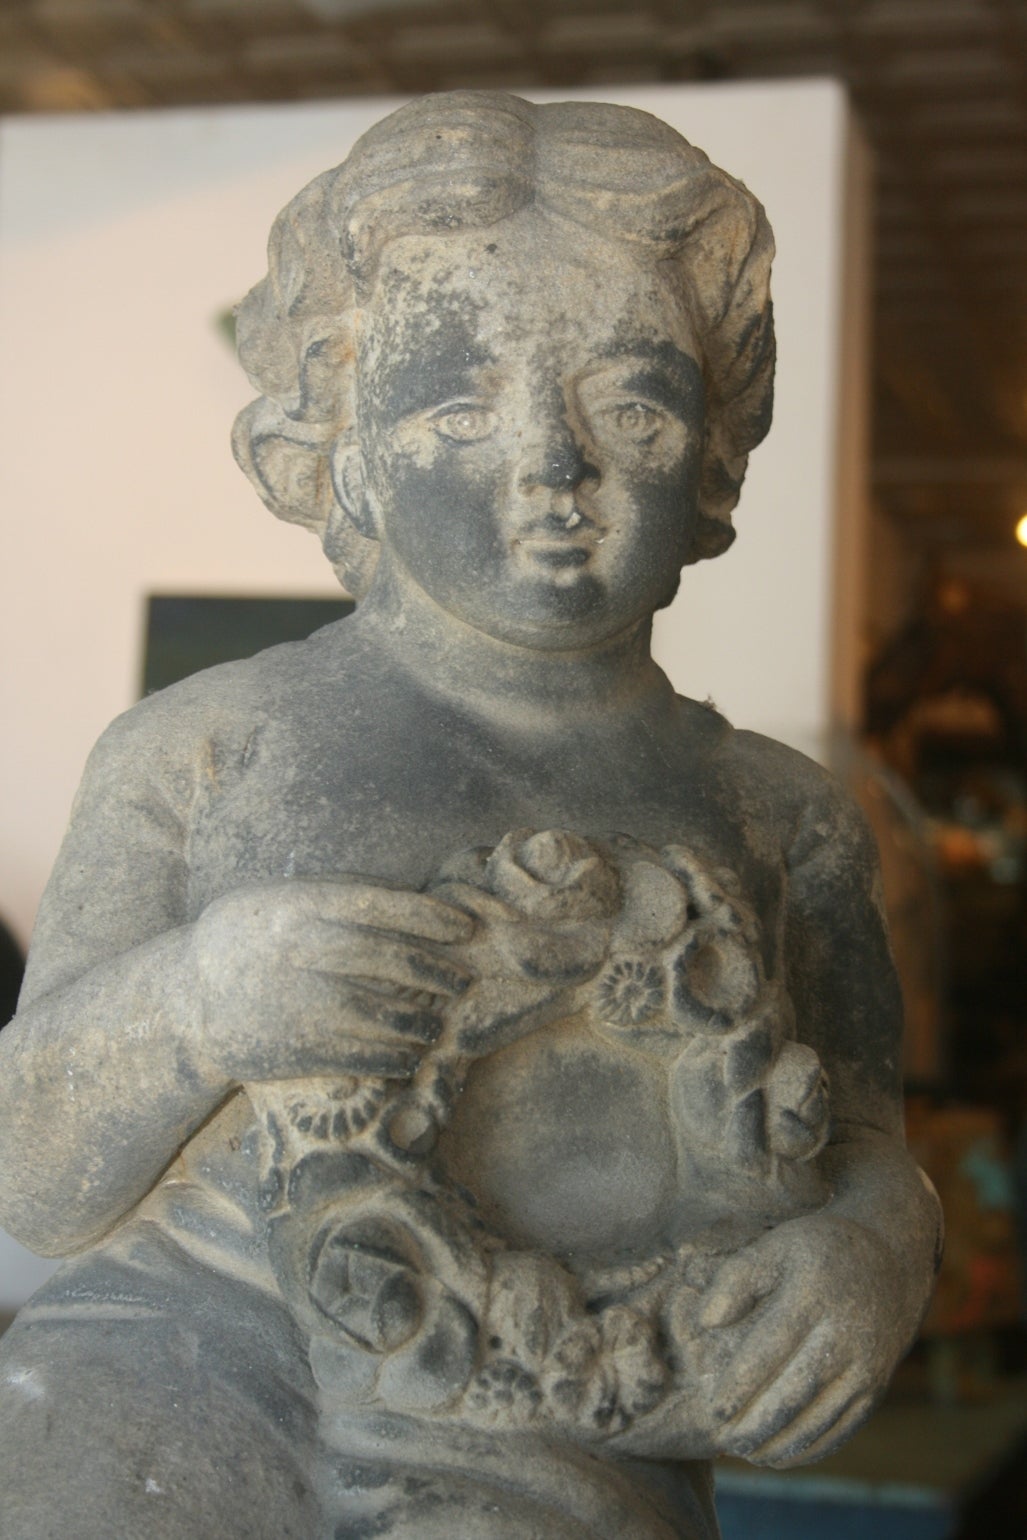 Beautiful 19th century carved limestone garden sculpture of a Putti. The figure is nicely carved and has an interesting patina reminiscent of the old soot stained stone homes in the city of London which is probably where this is from.